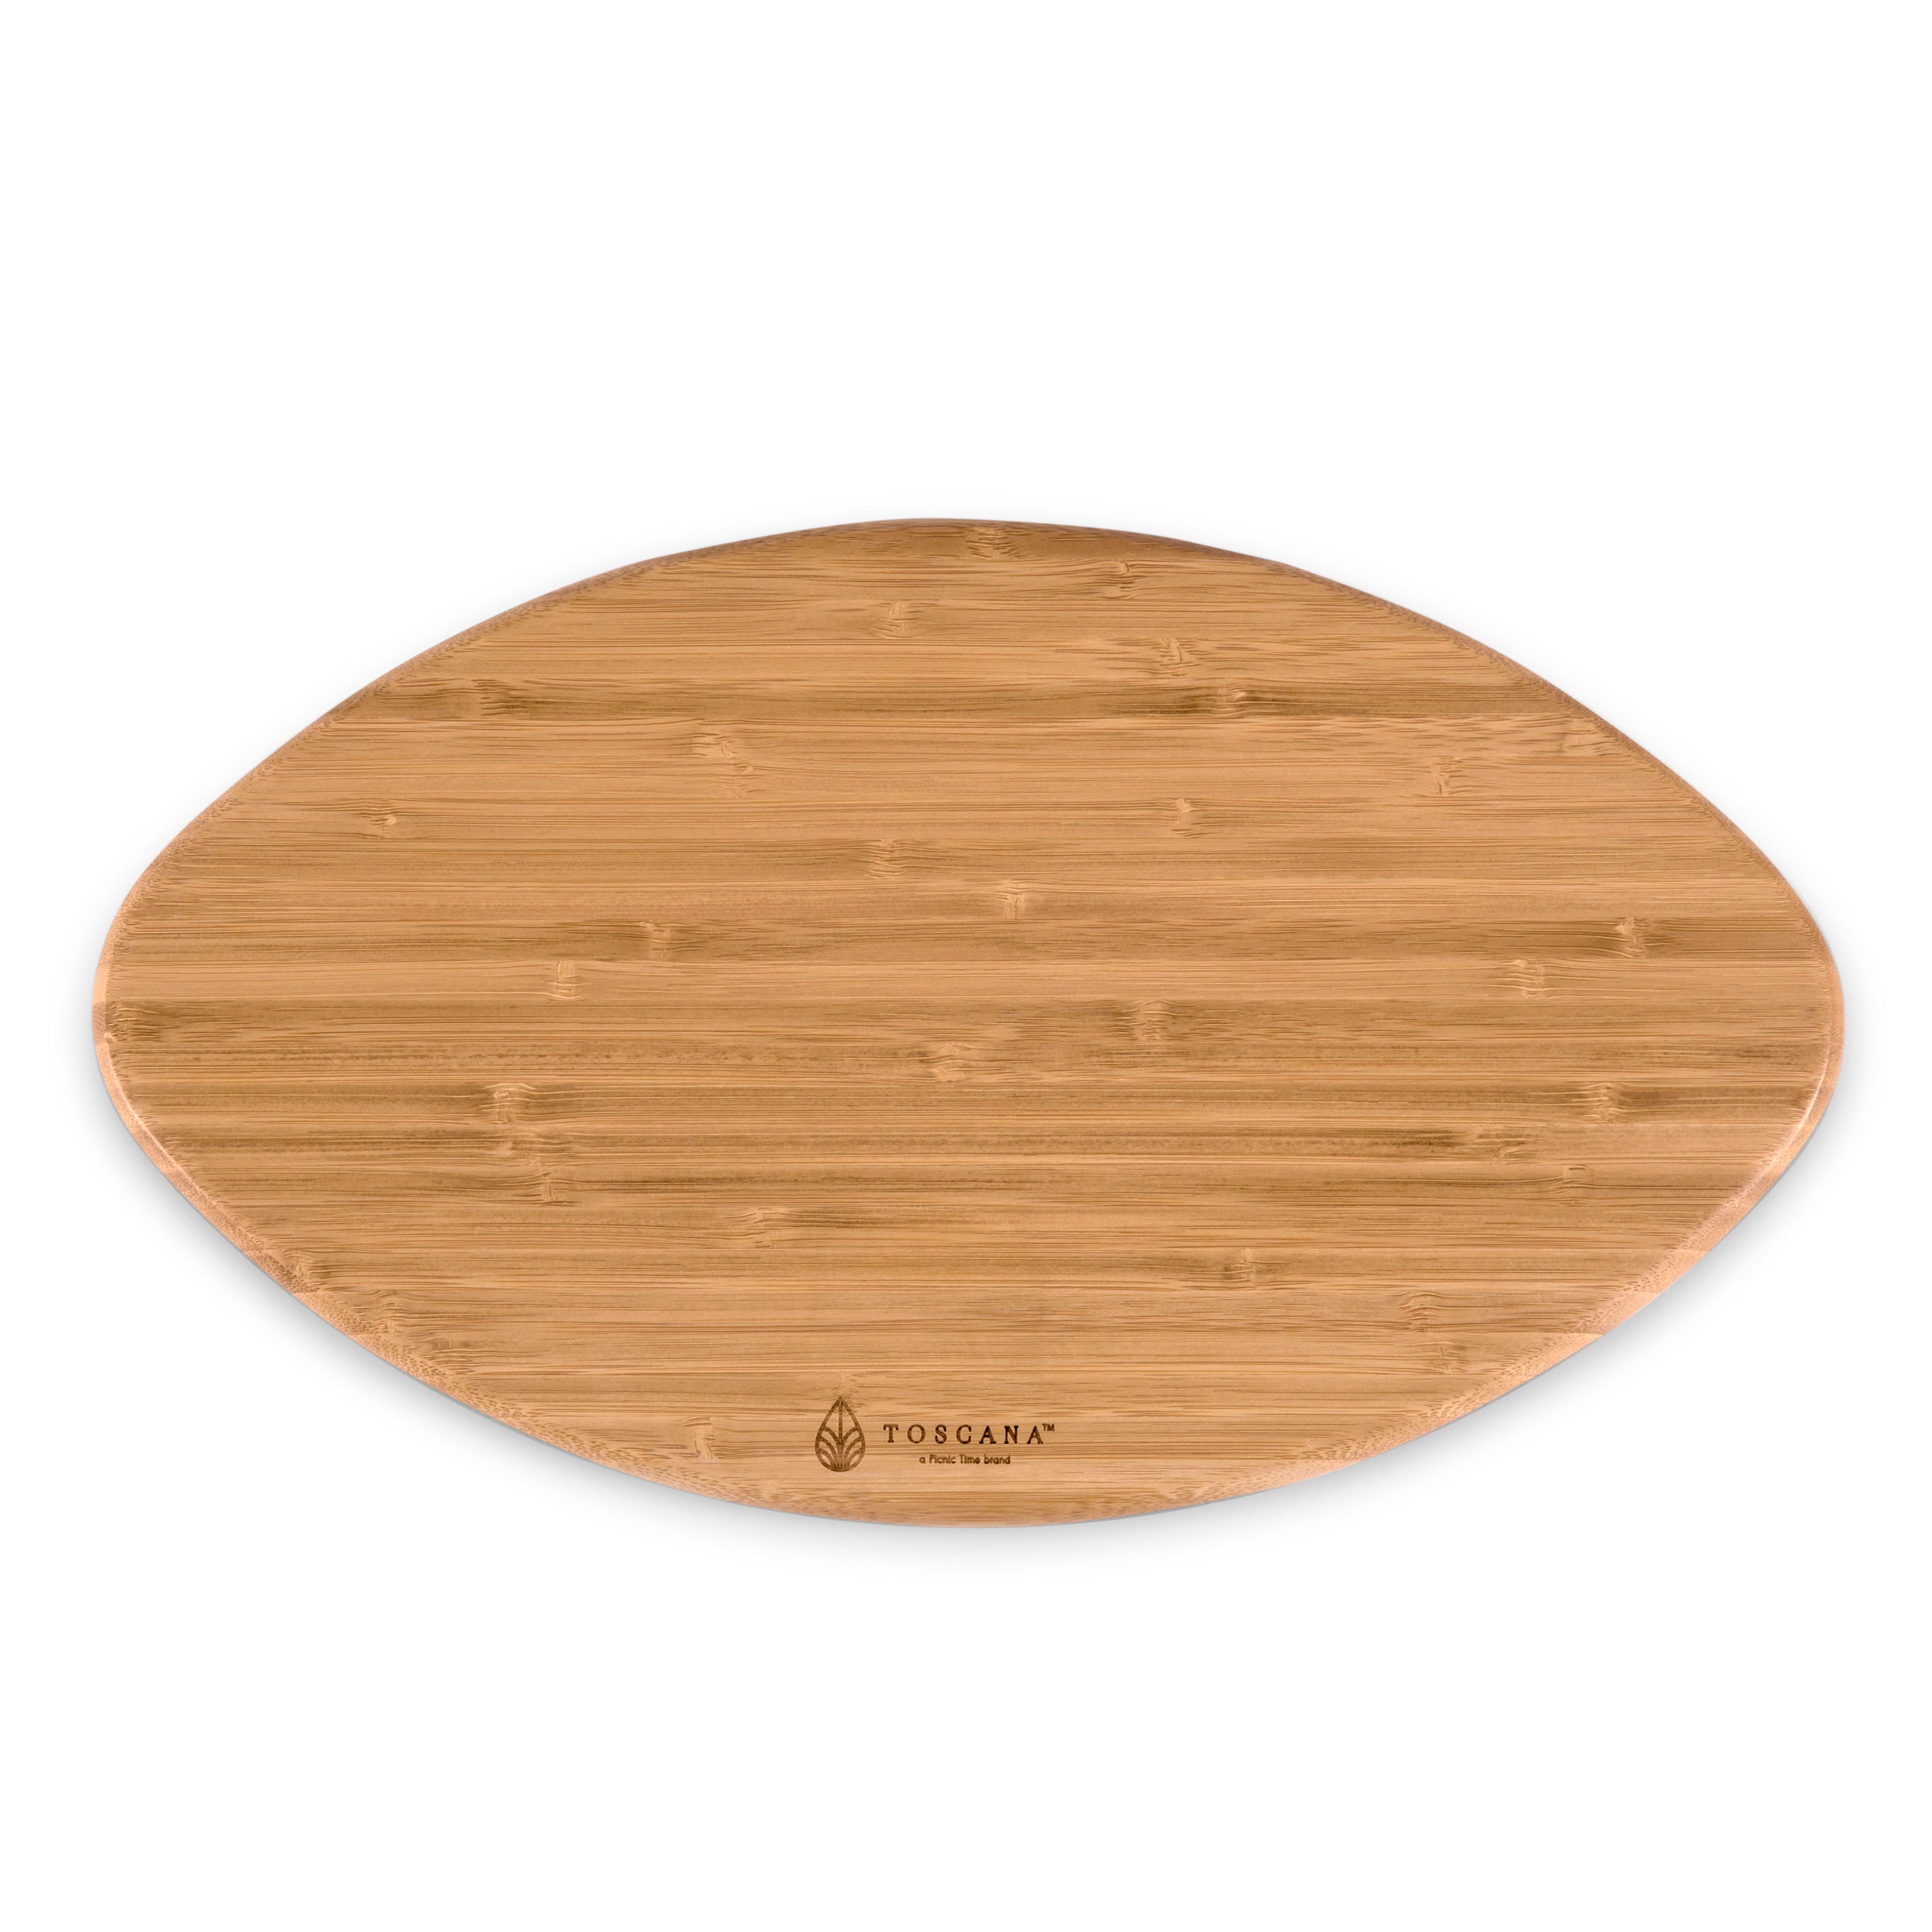 Washington Commanders Mickey Mouse - Touchdown! Football Cutting Board & Serving Tray